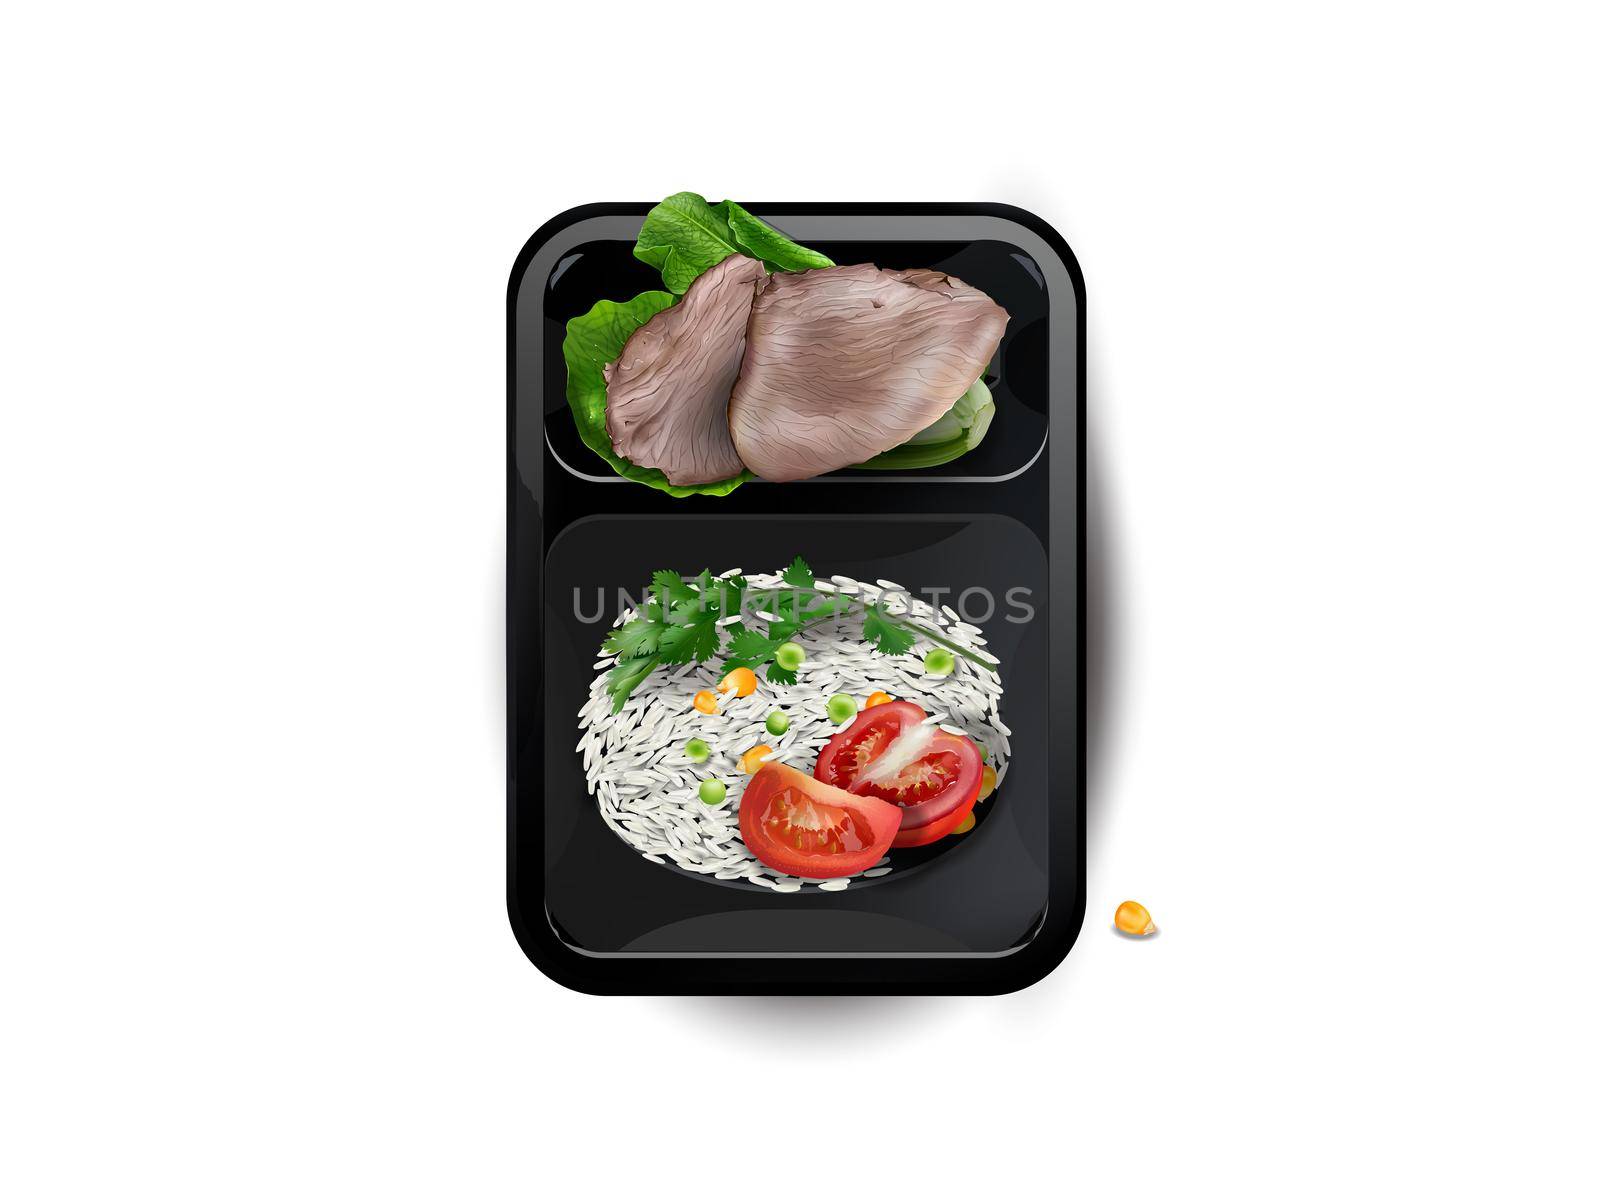 Boiled meat with rice and vegetables in a lunchbox. by ConceptCafe